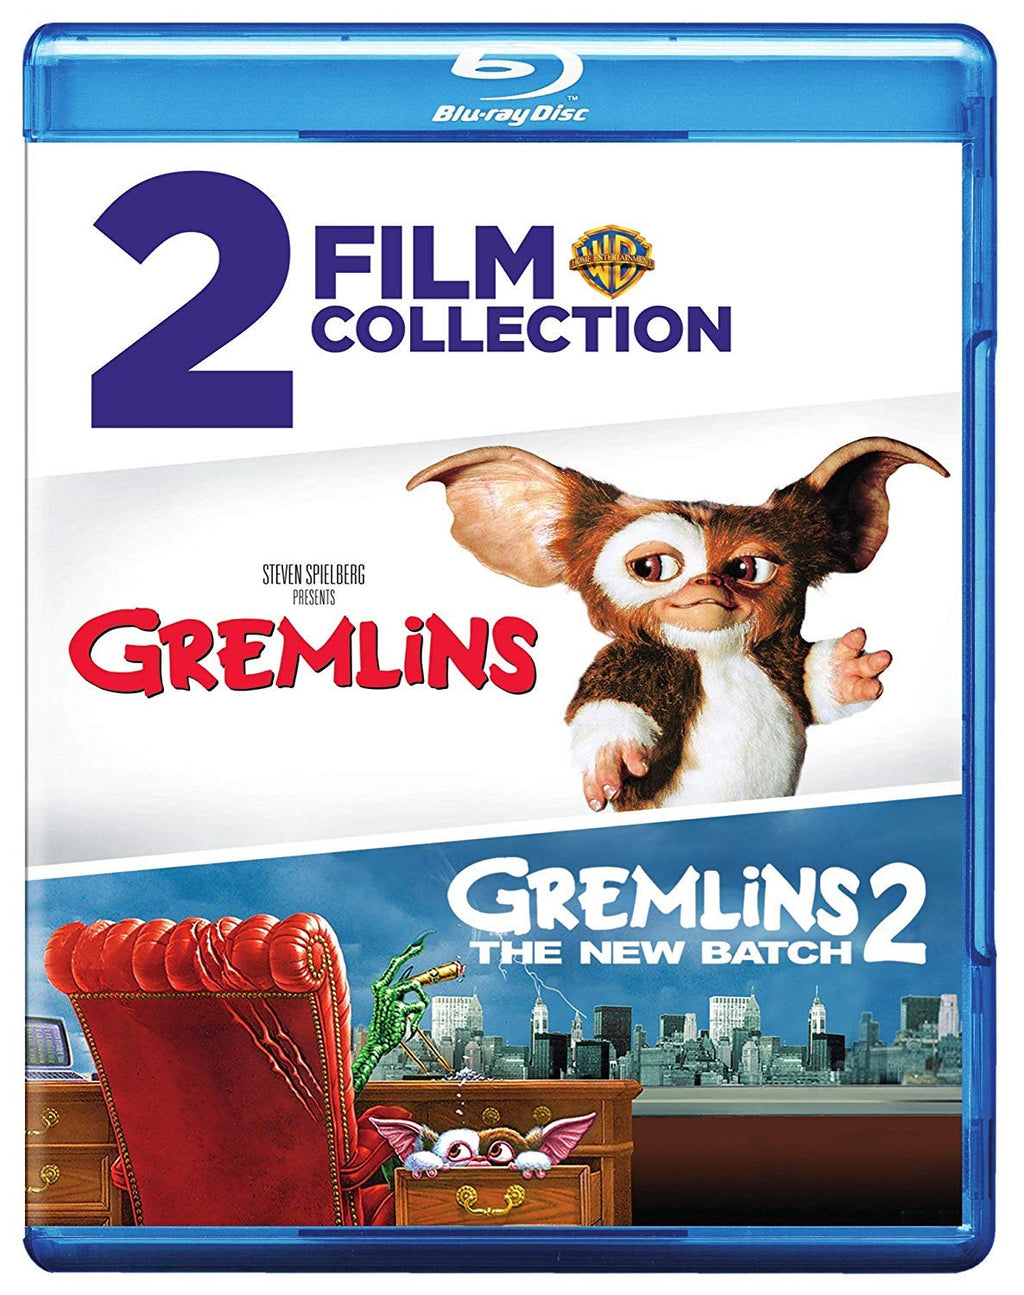 Gremlins / Gremlins 2: The New Batch (2-Film Collection) Blu-ray